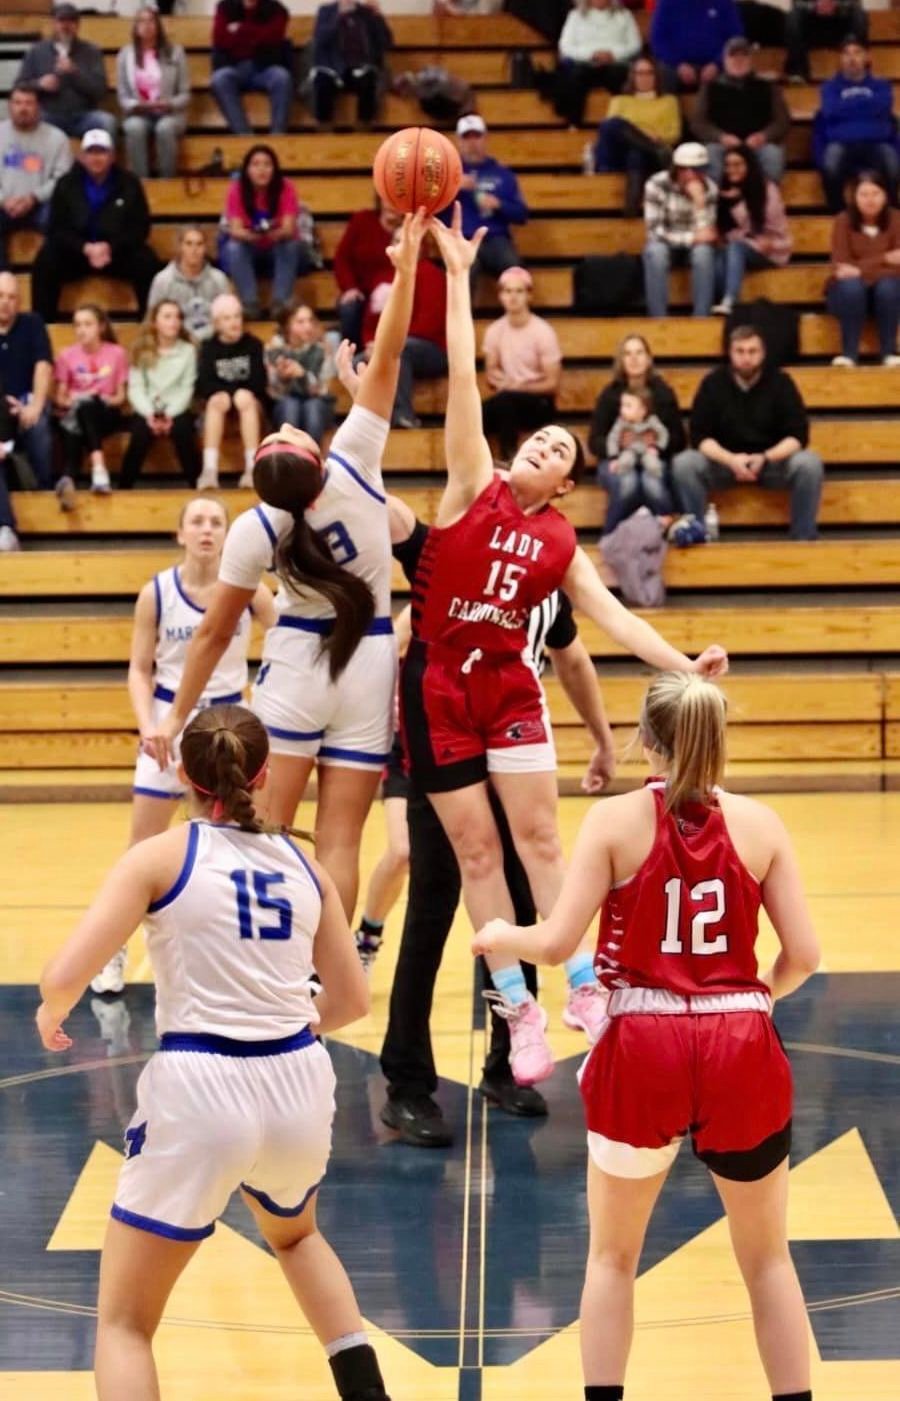 The opening jump for against the Chadwick Cardinals is Freshman Chloe Bateman.


Photos by Julie Manary